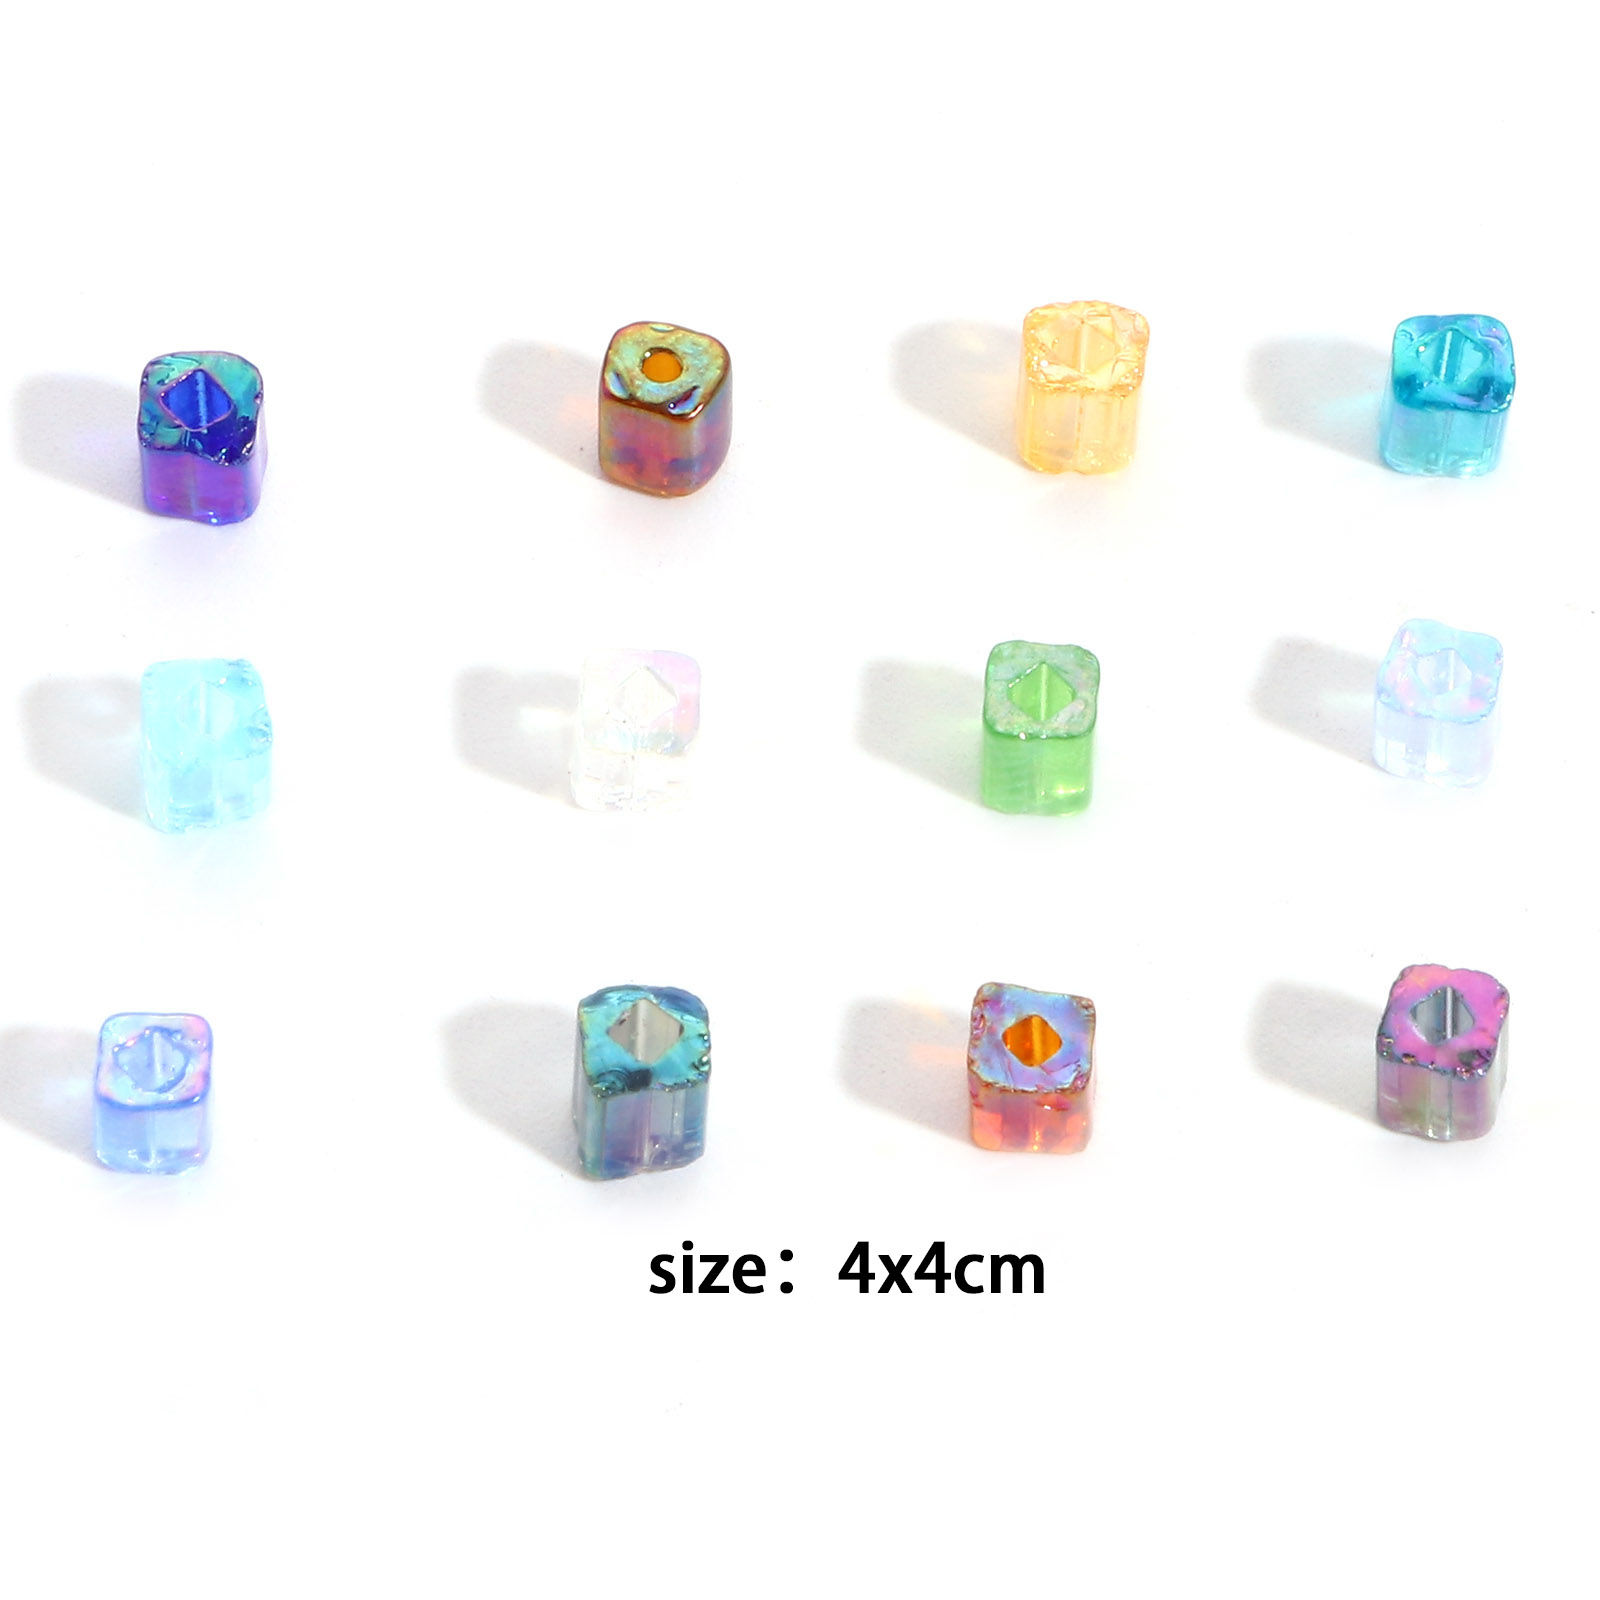 Glass Square Seed Seed Beads Square Multicolor Transparent AB Color About 4mm x 4mm, Hole: Approx 1.2mm, 100 Grams の画像